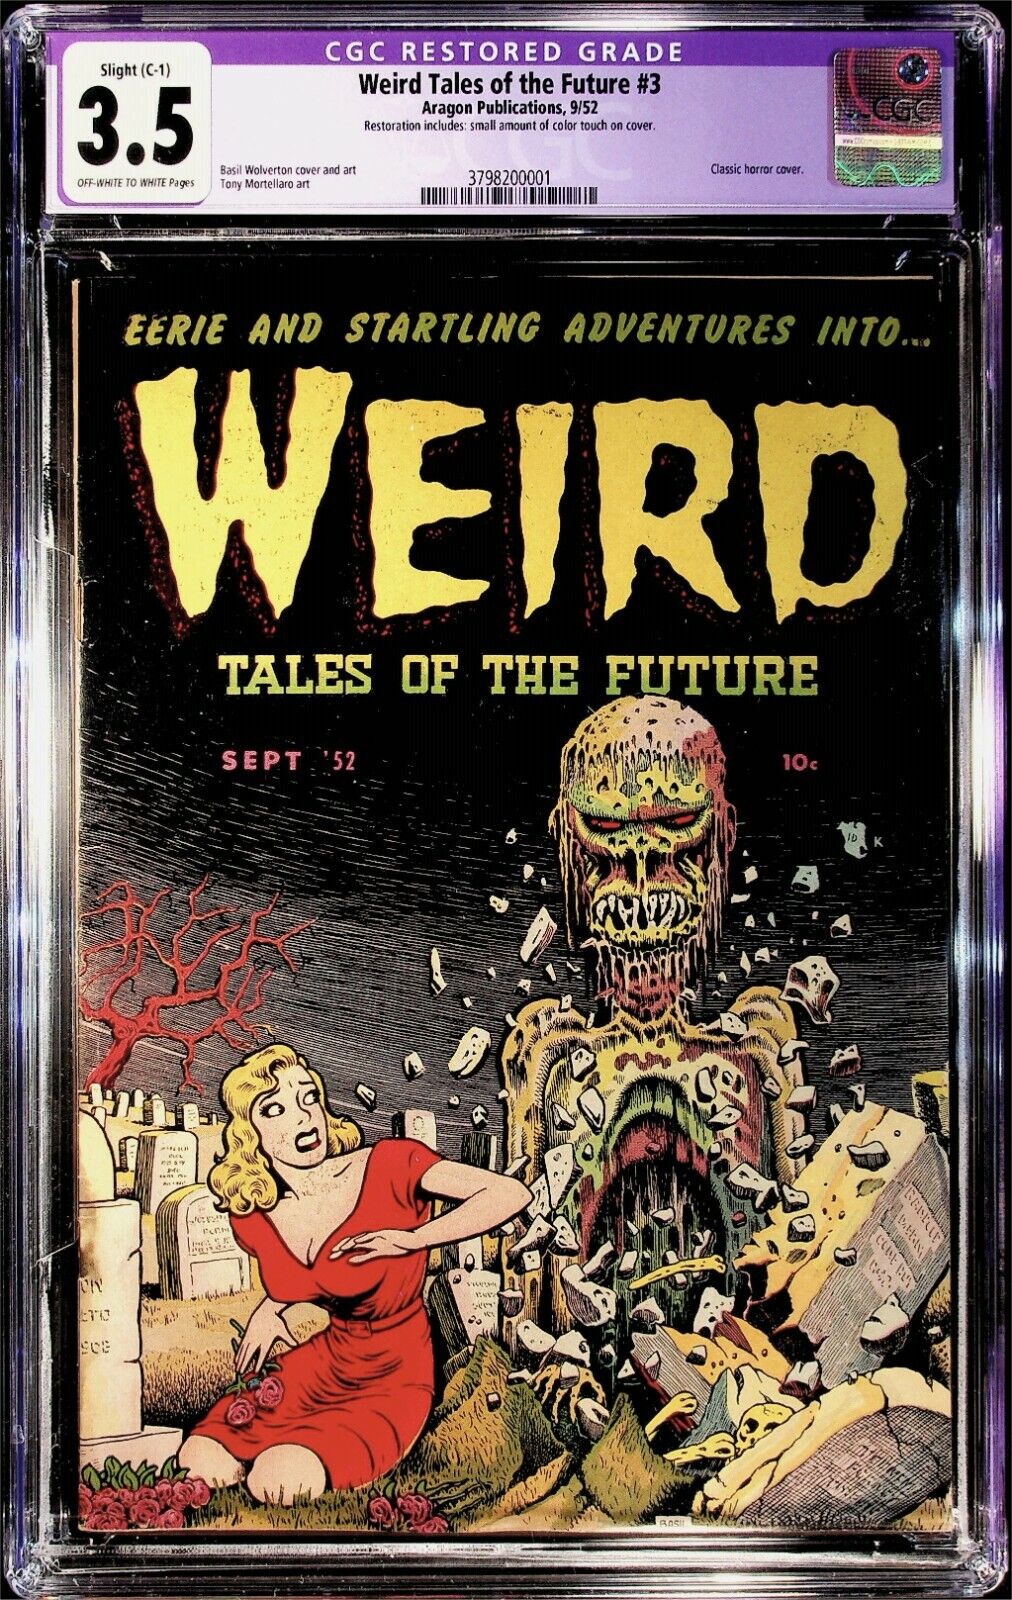 Weird Tales Of The Future 3, Sept \'52, CGC 3.5